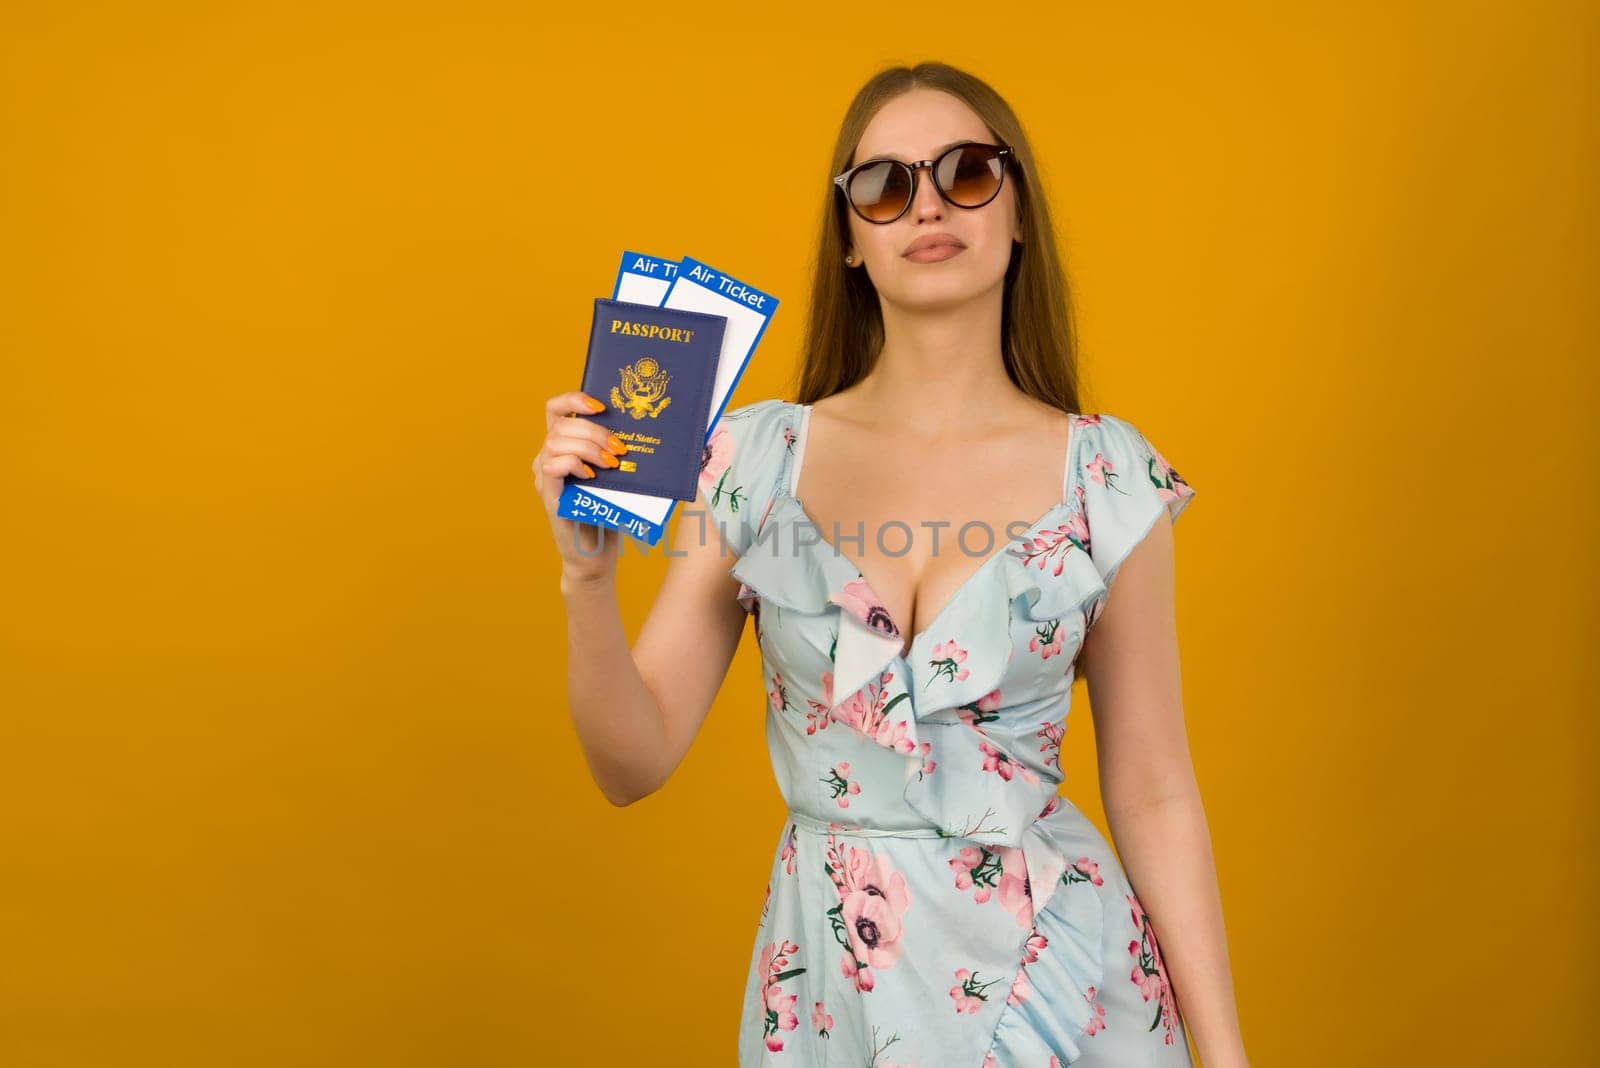 Joyful young woman in blue dress with flowers and sunglasses is holding airline tickets with a passport on a yellow background. Rejoices in the resumption of tourism after the coronovirus pandemic.